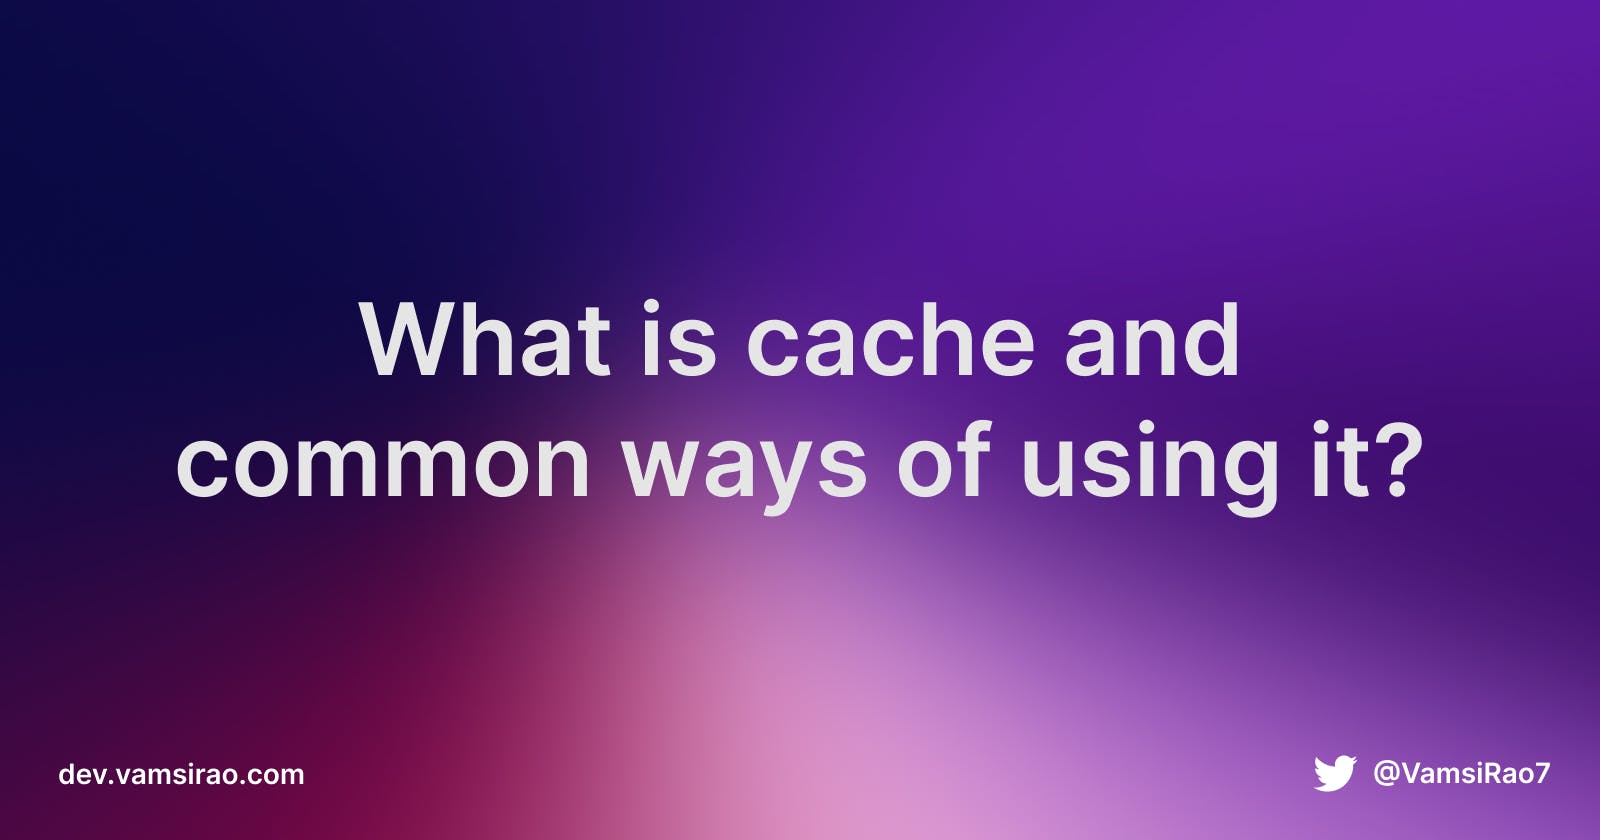 What is cache and common ways of using it?